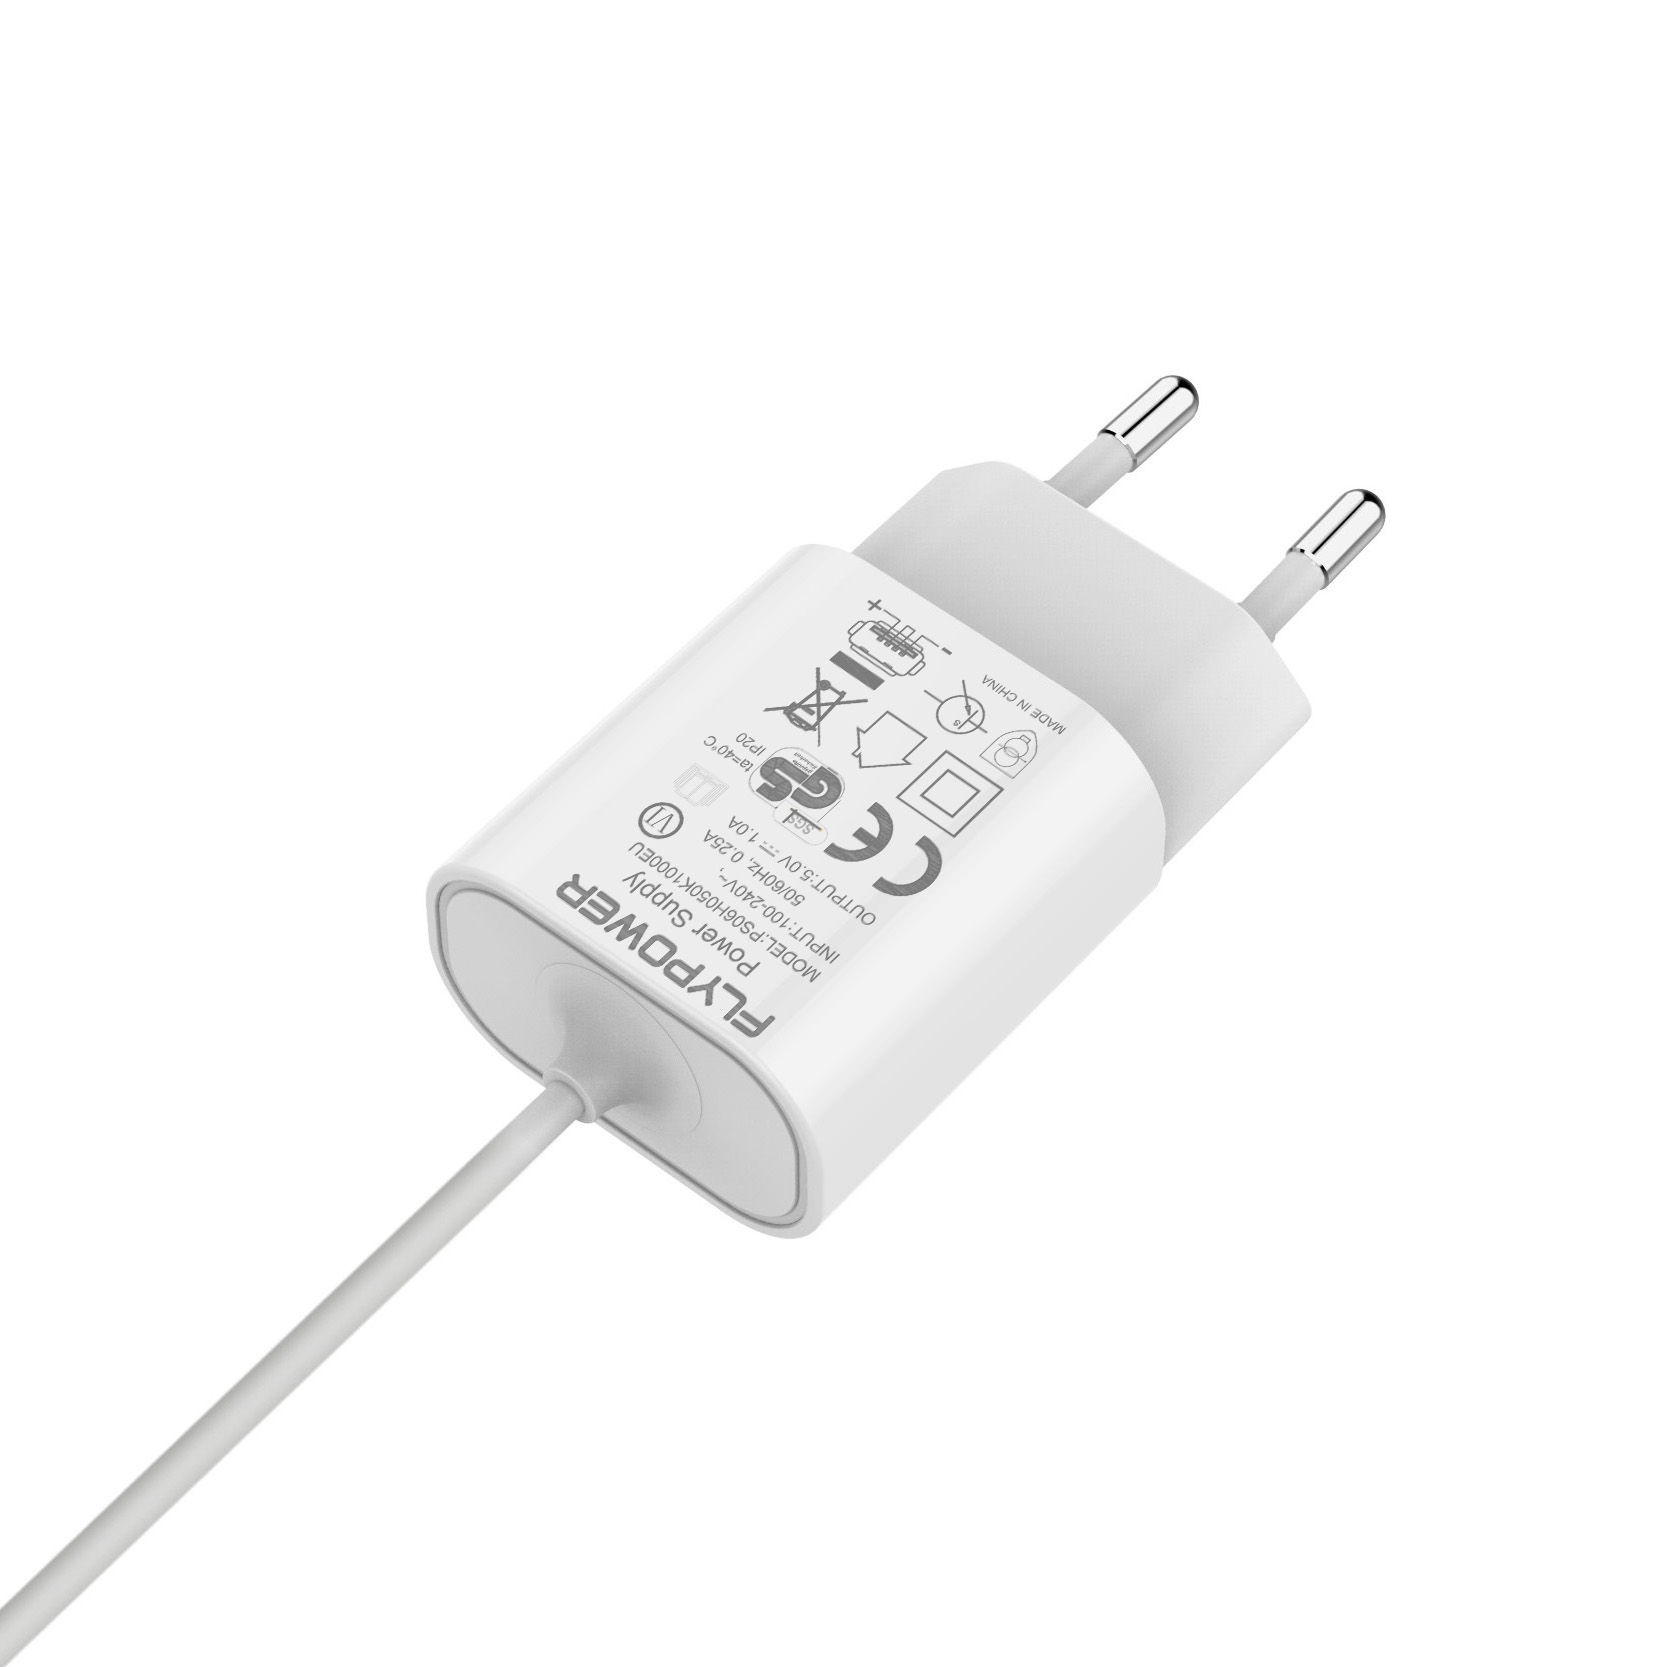 3V0.5A CE power adapter(with line) white